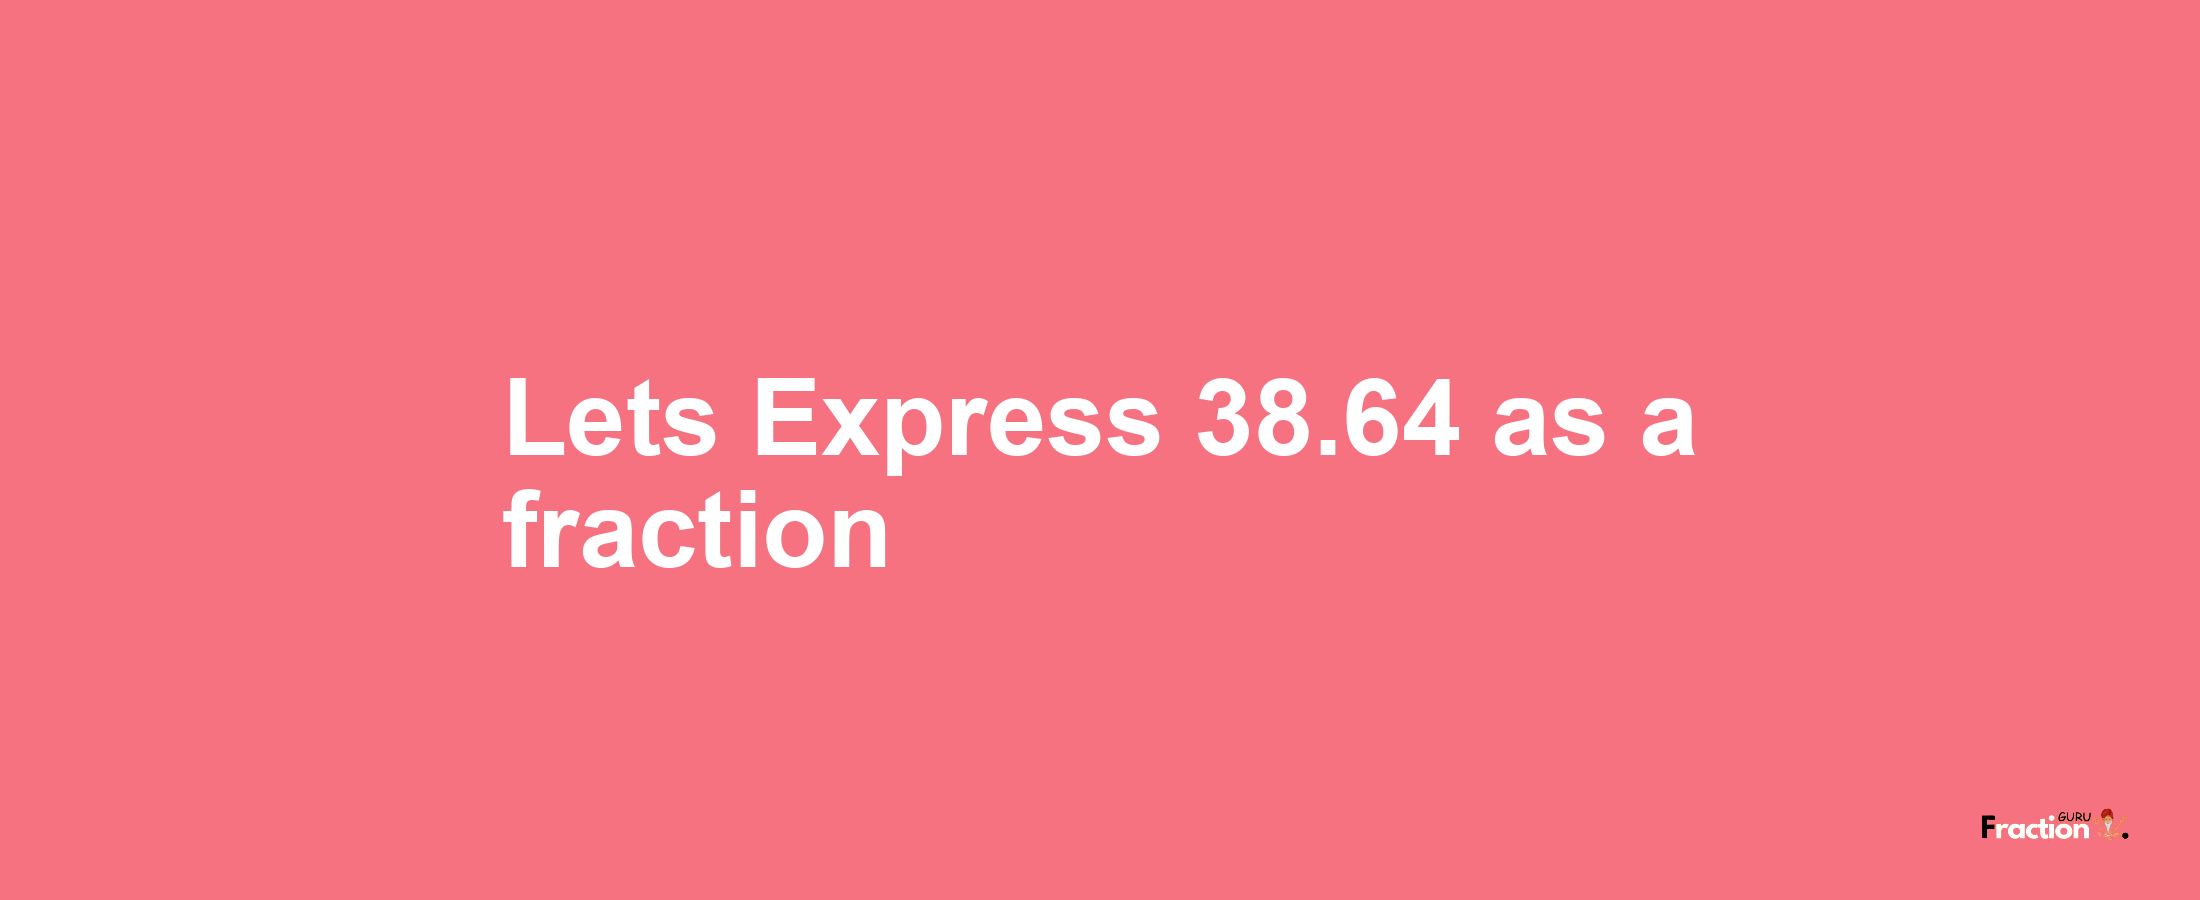 Lets Express 38.64 as afraction